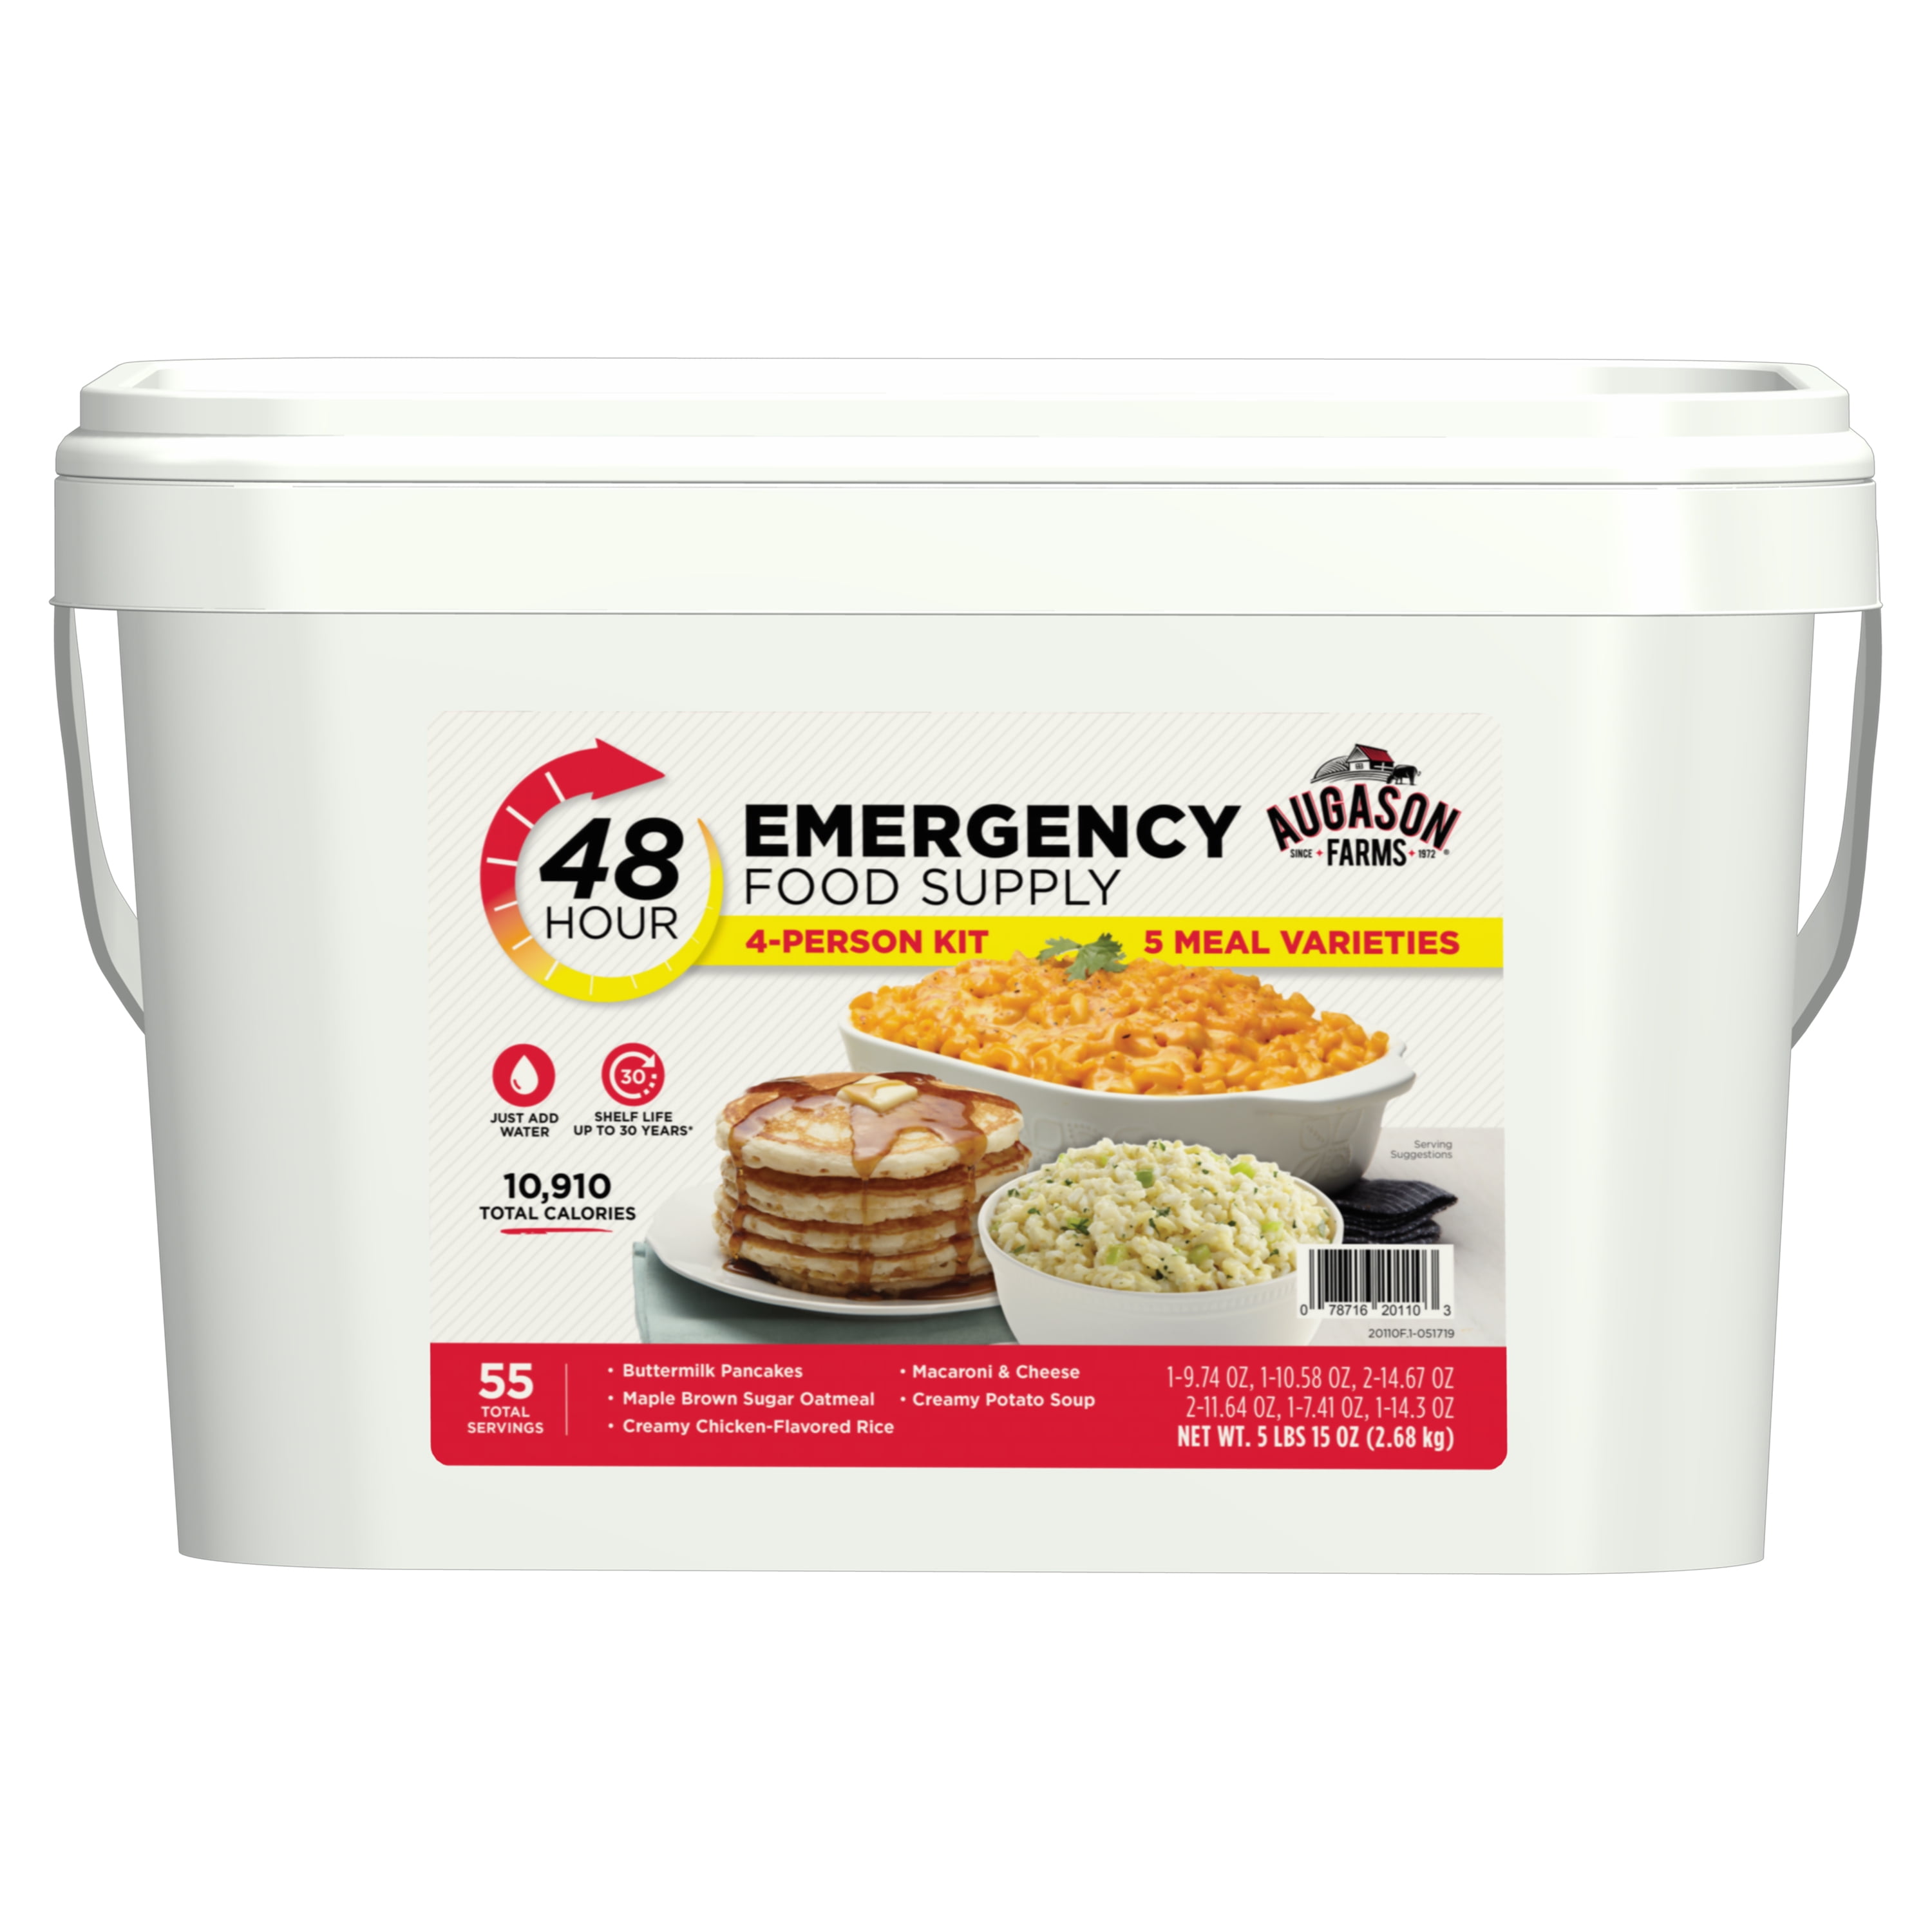 mountain house 14 day emergency food supply - 10 Best Emergency Food Kits in 2022 - Food Kits for Emergencies